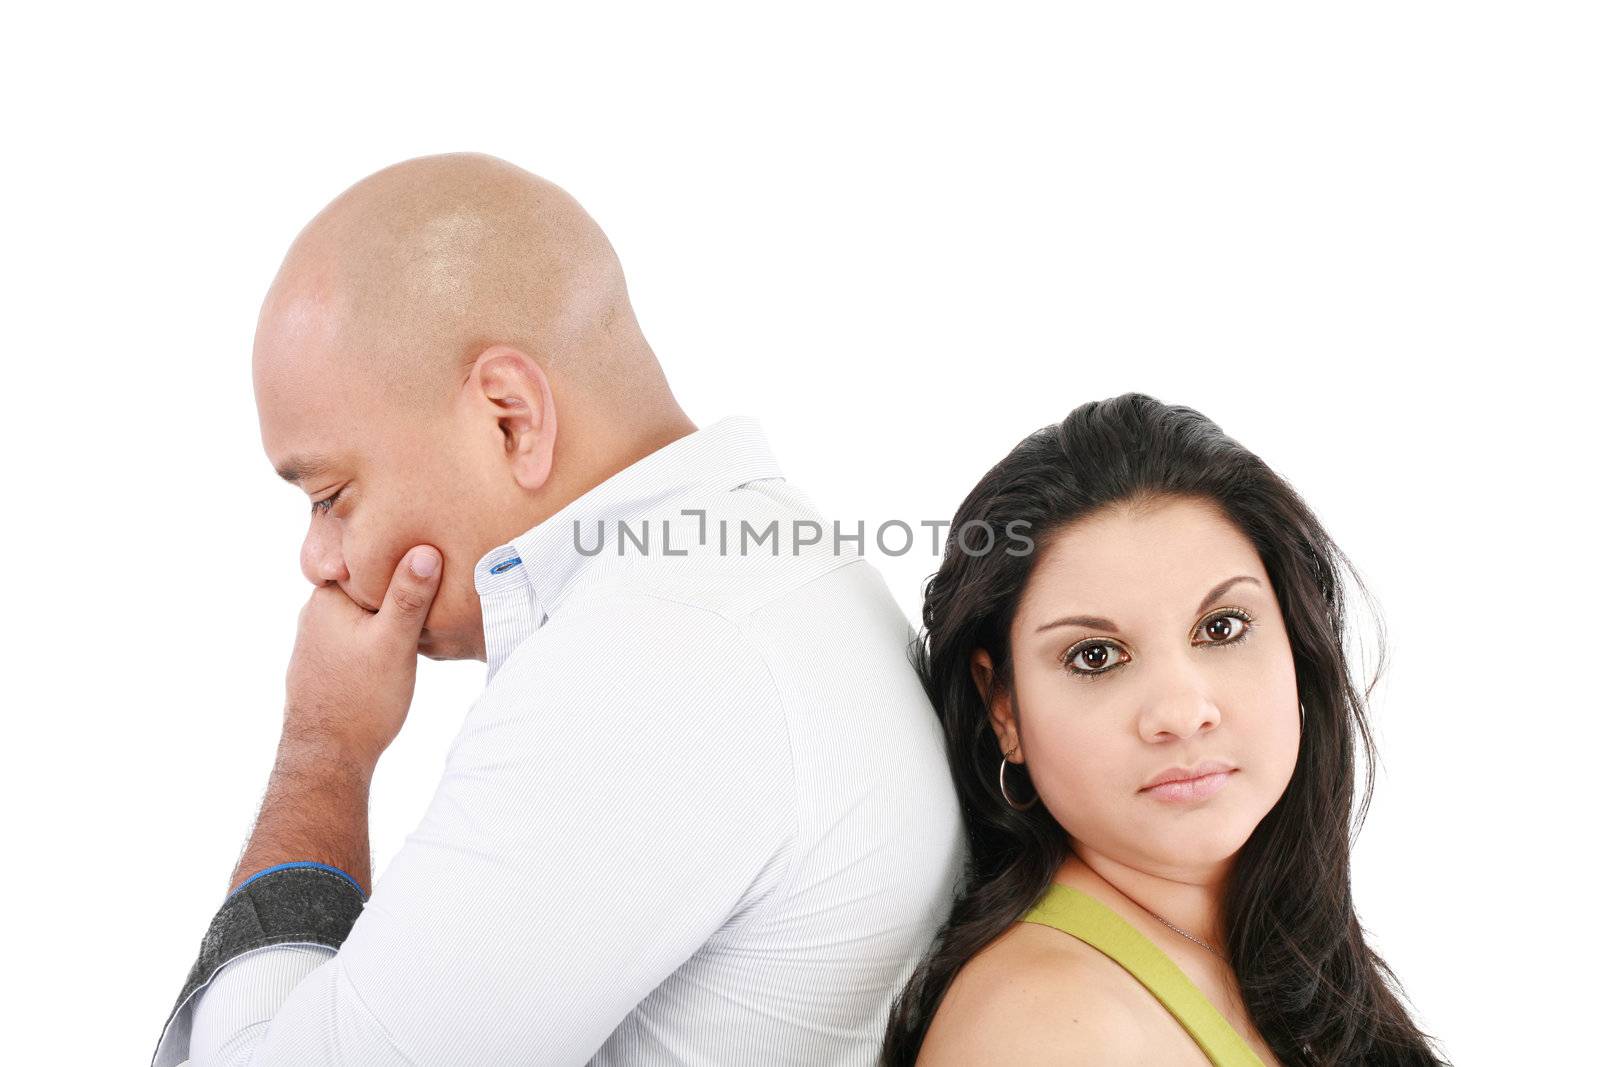 Young couple standing back to back having relationship difficult by dacasdo